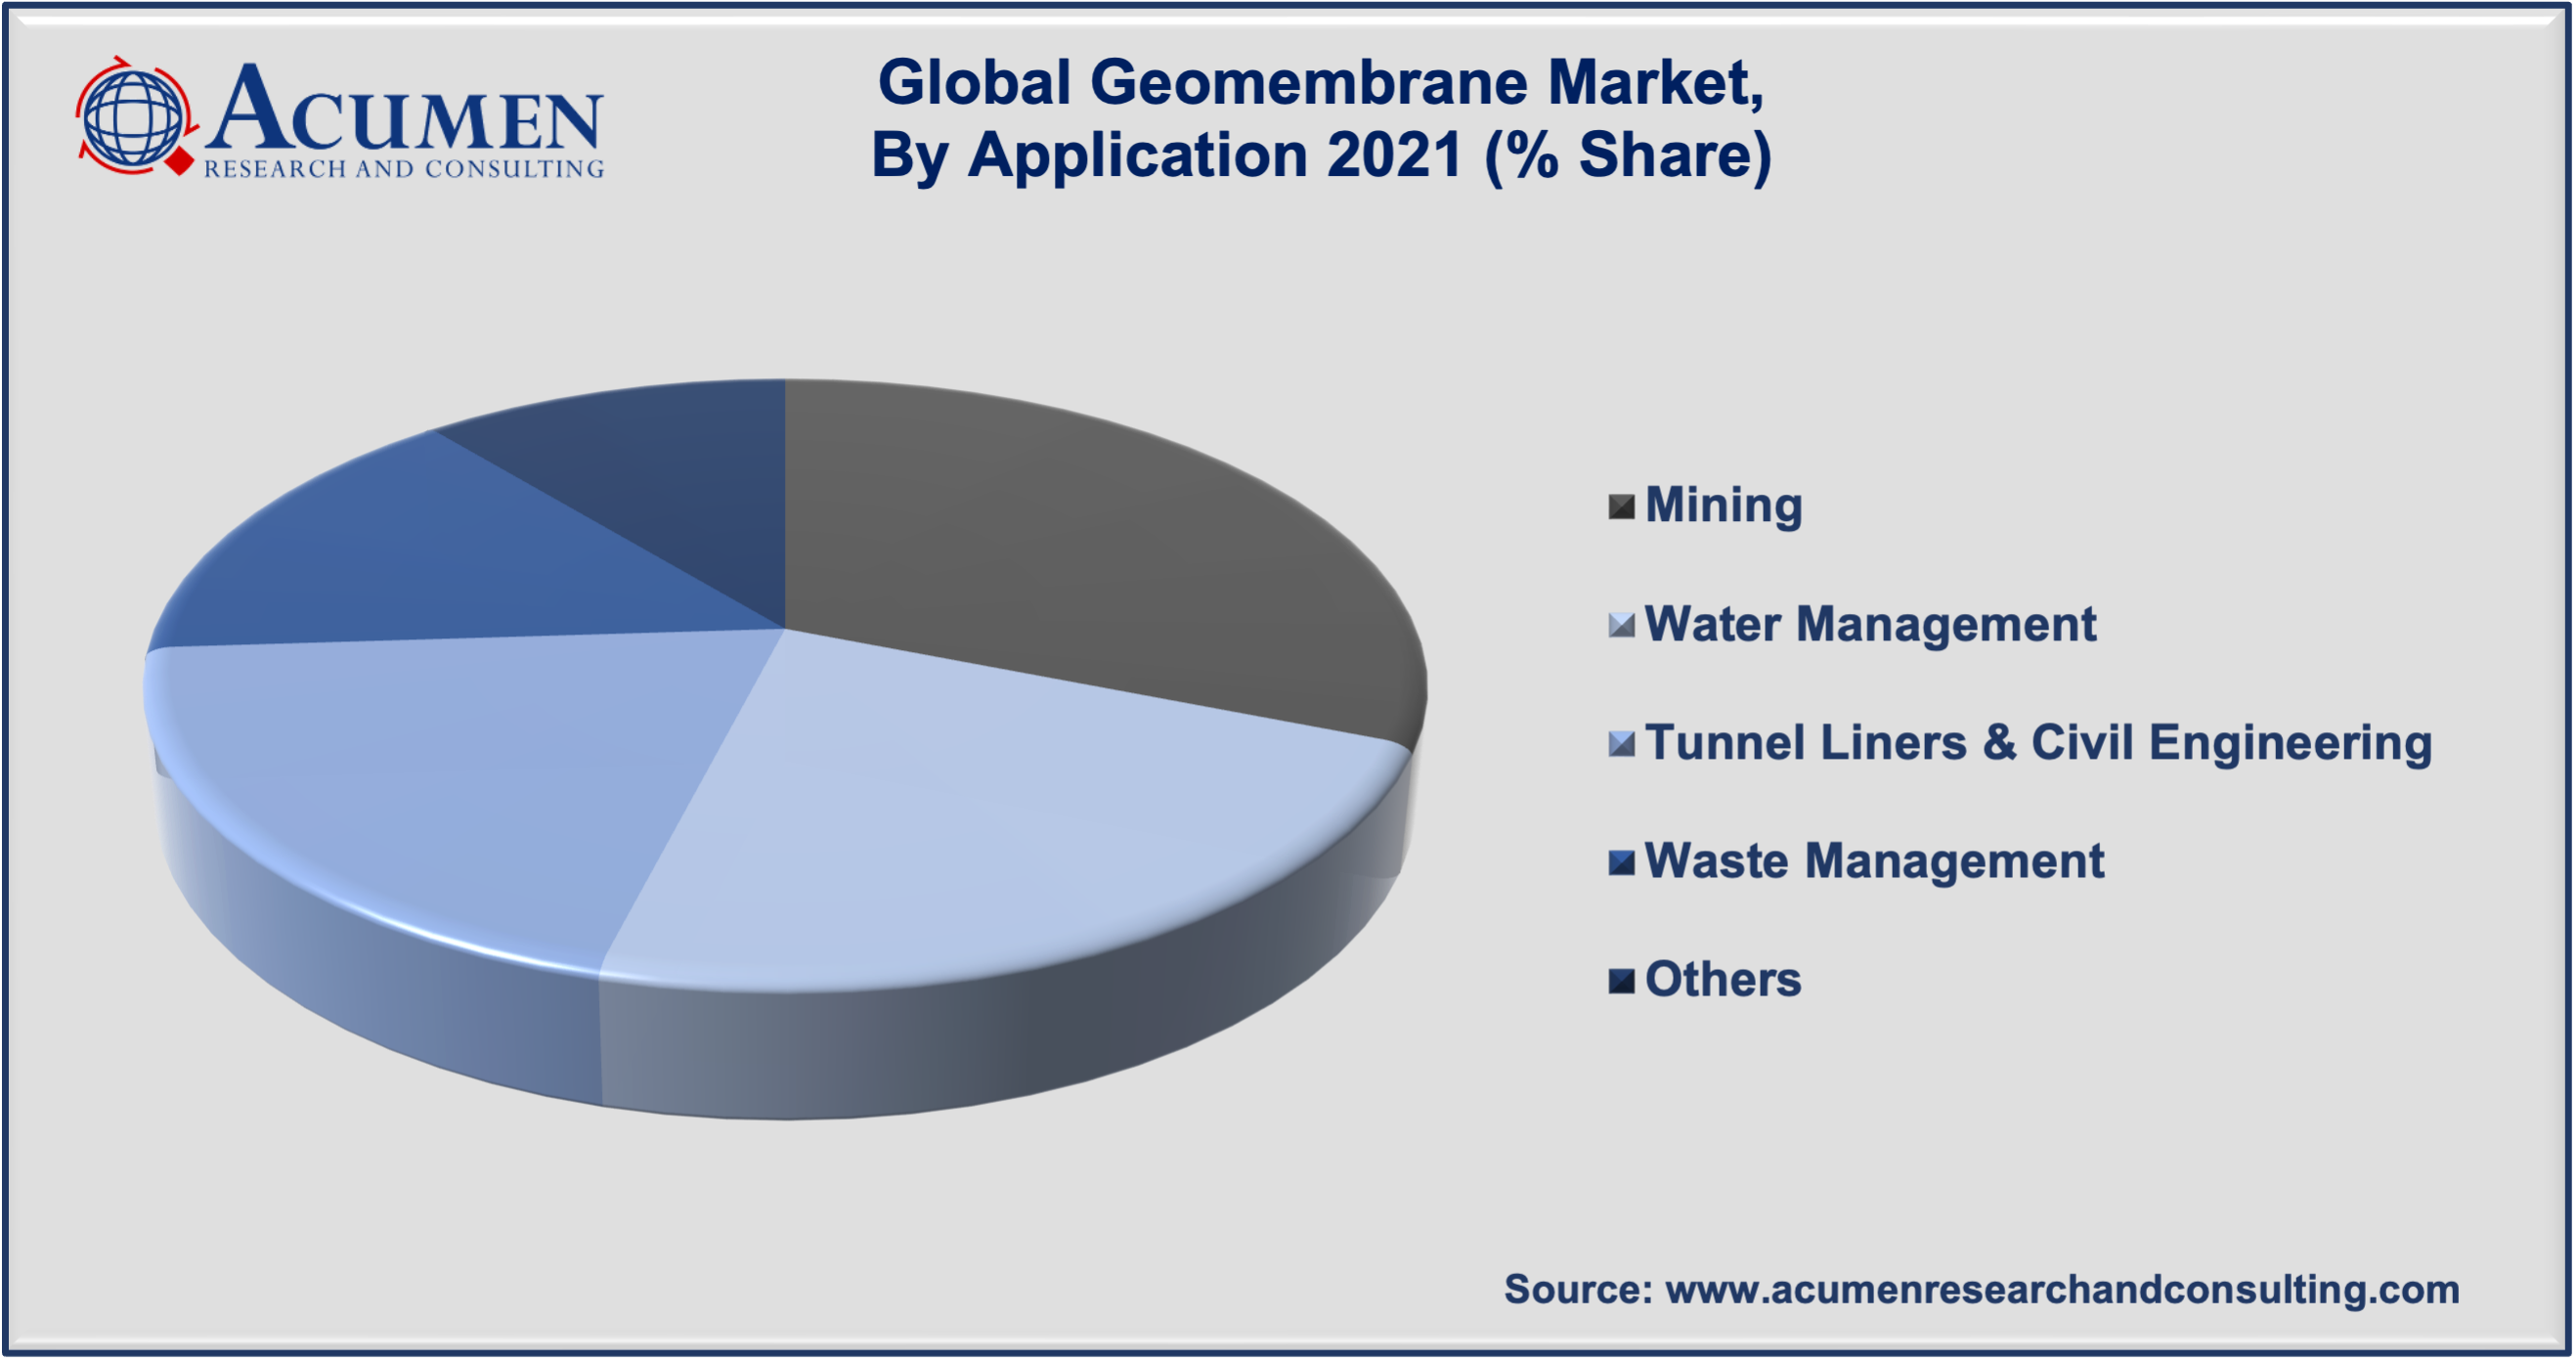 Geomembrane Market Analysis accounted for USD 2,098 Million in 2021 and is expected to reach USD 3,241 Million by 2030 at a considerable CAGR of 5.1% during the forecast period from 2022 to 2030.